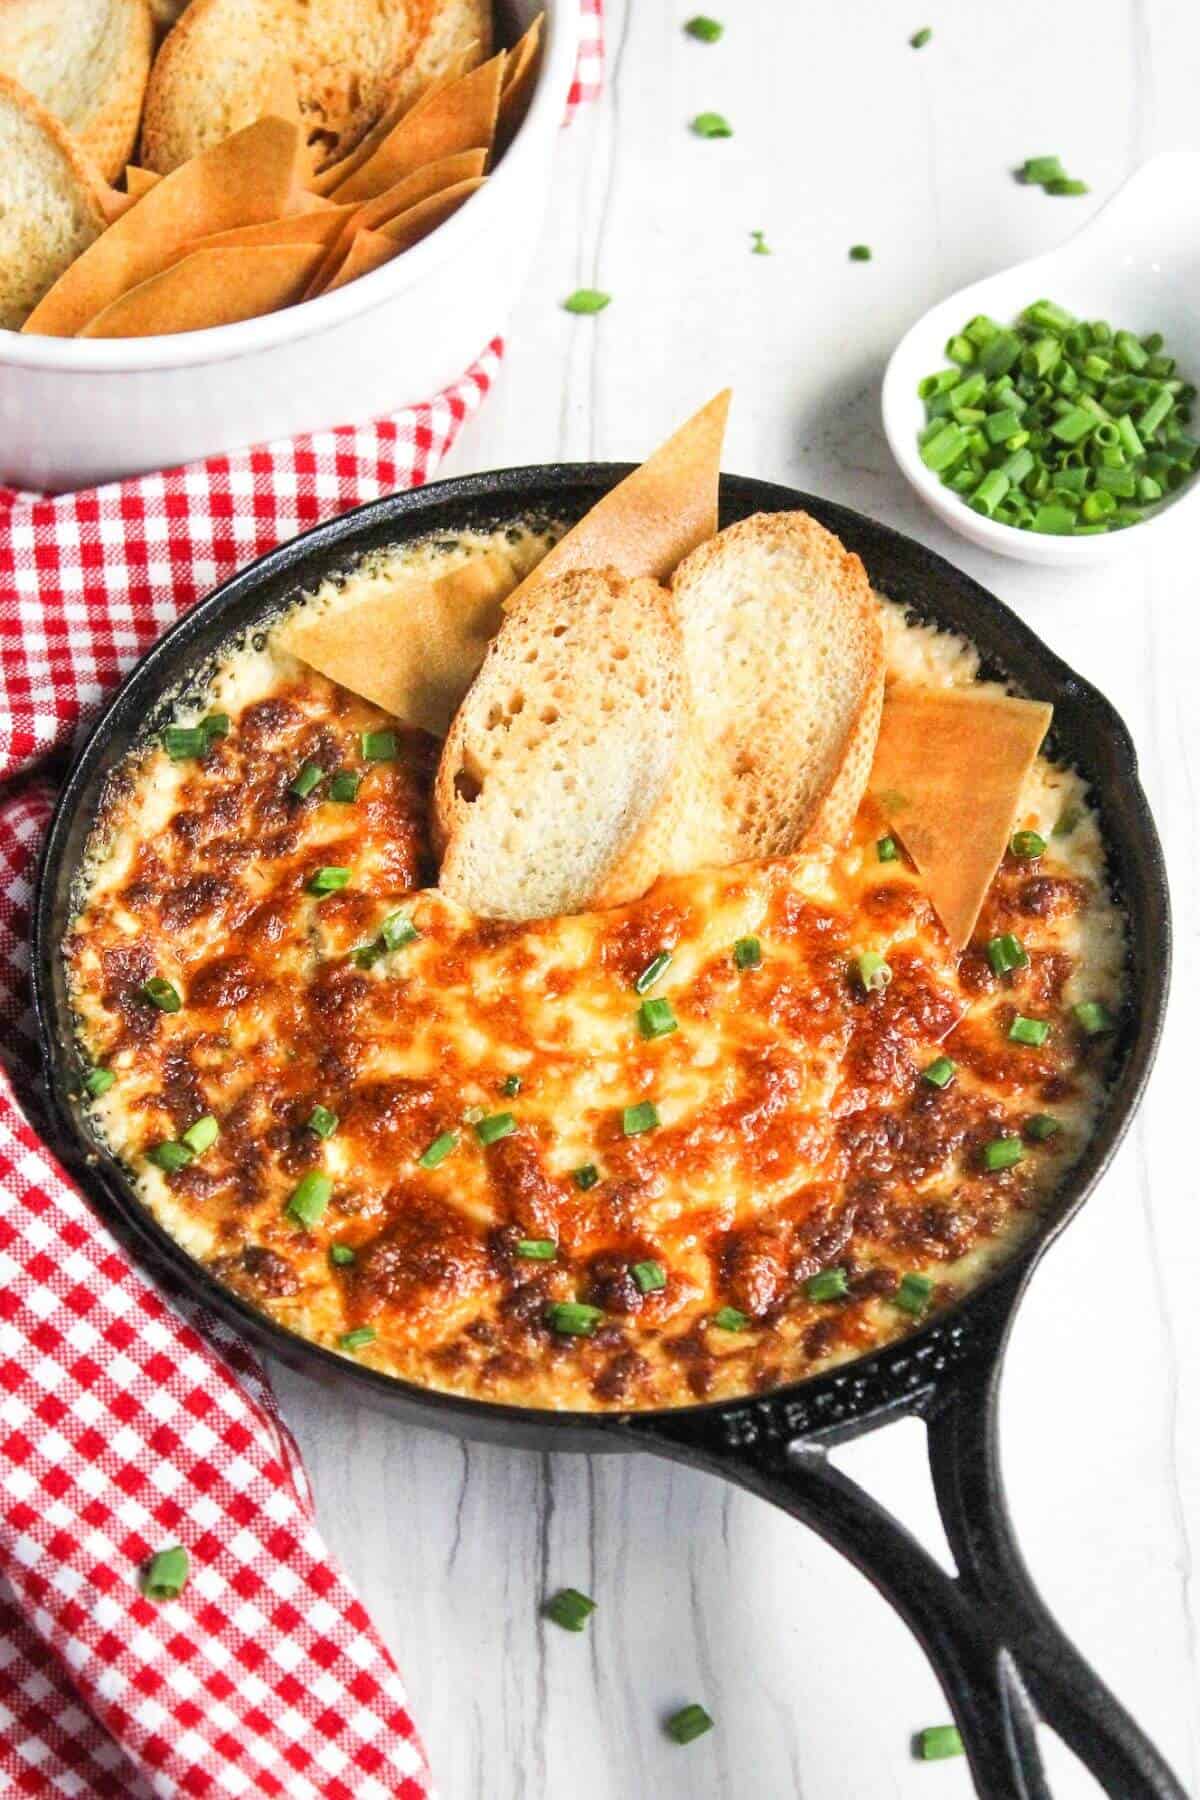 A skillet with cheesy crab dip and bread on a red and white checkered tablecloth.